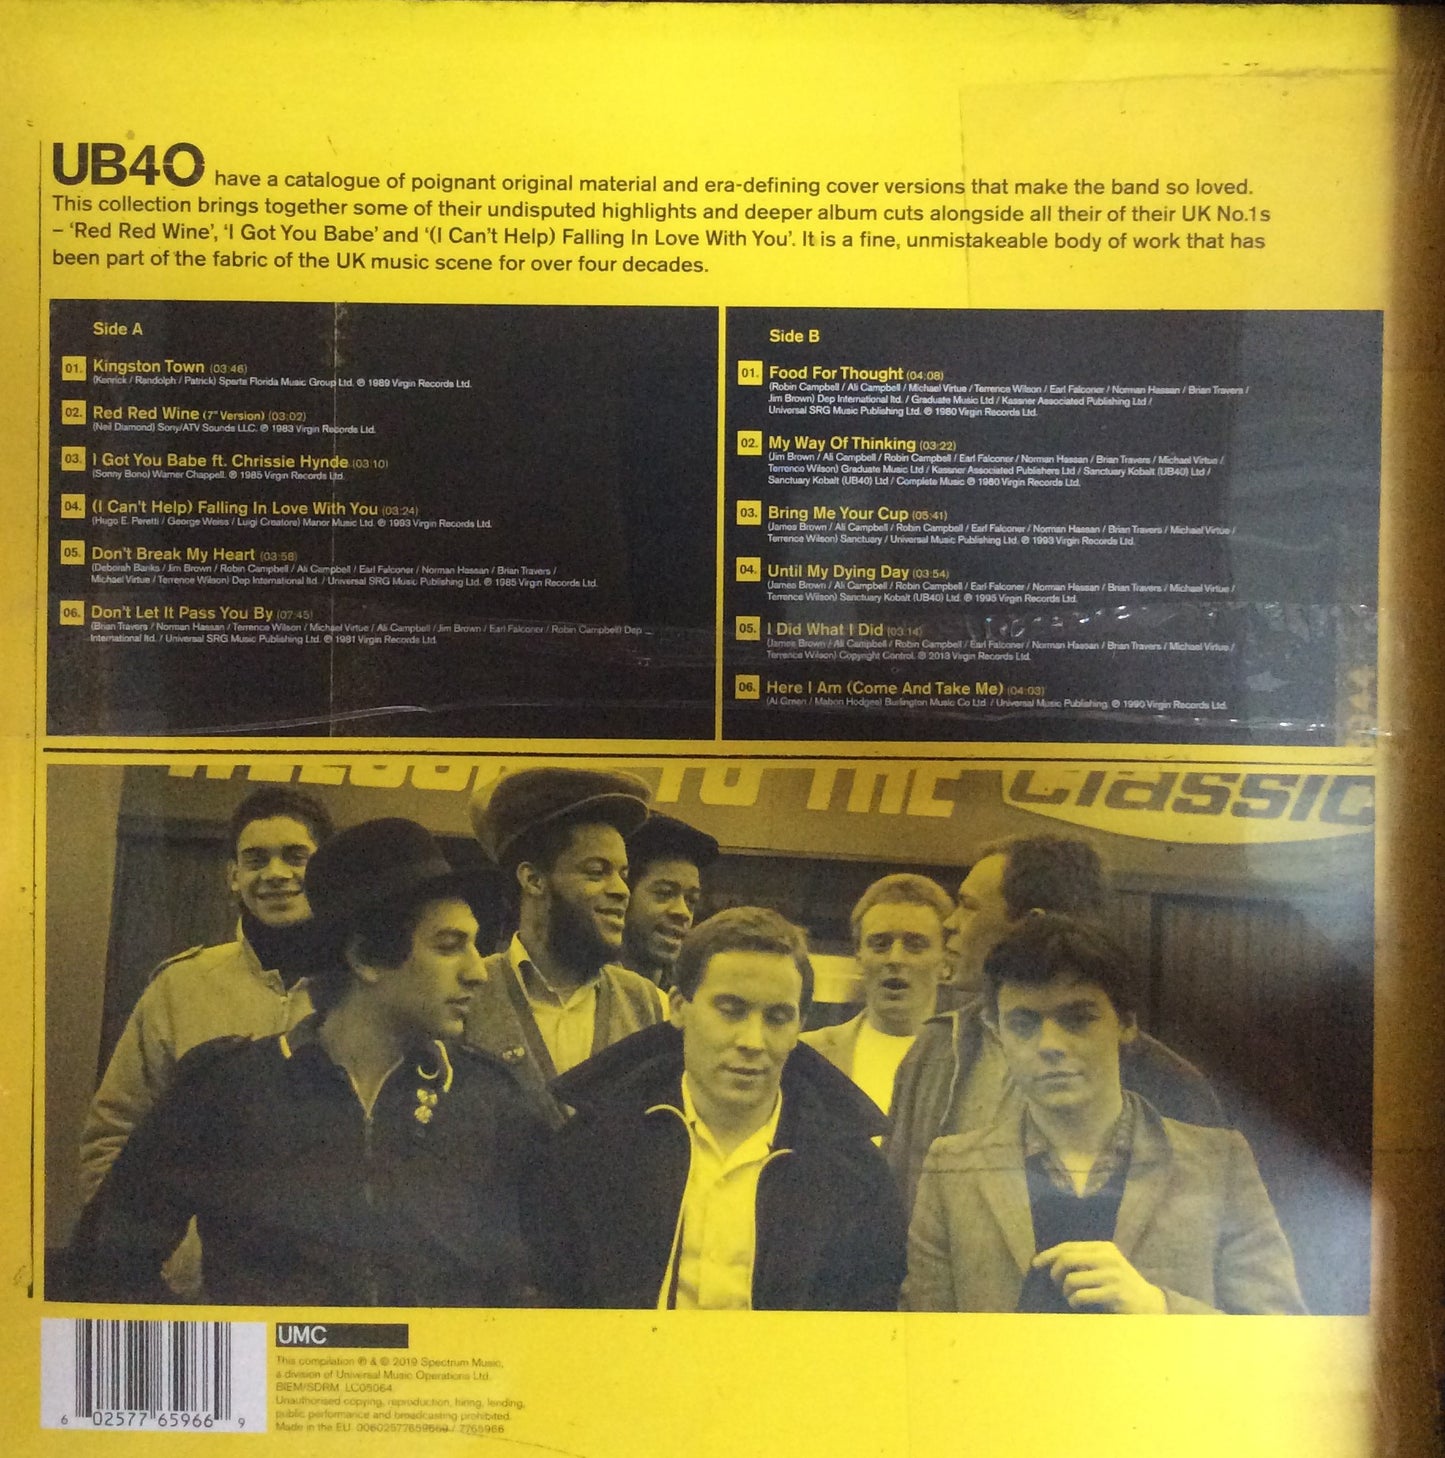 UB40 - Red Red Wine - The Collection